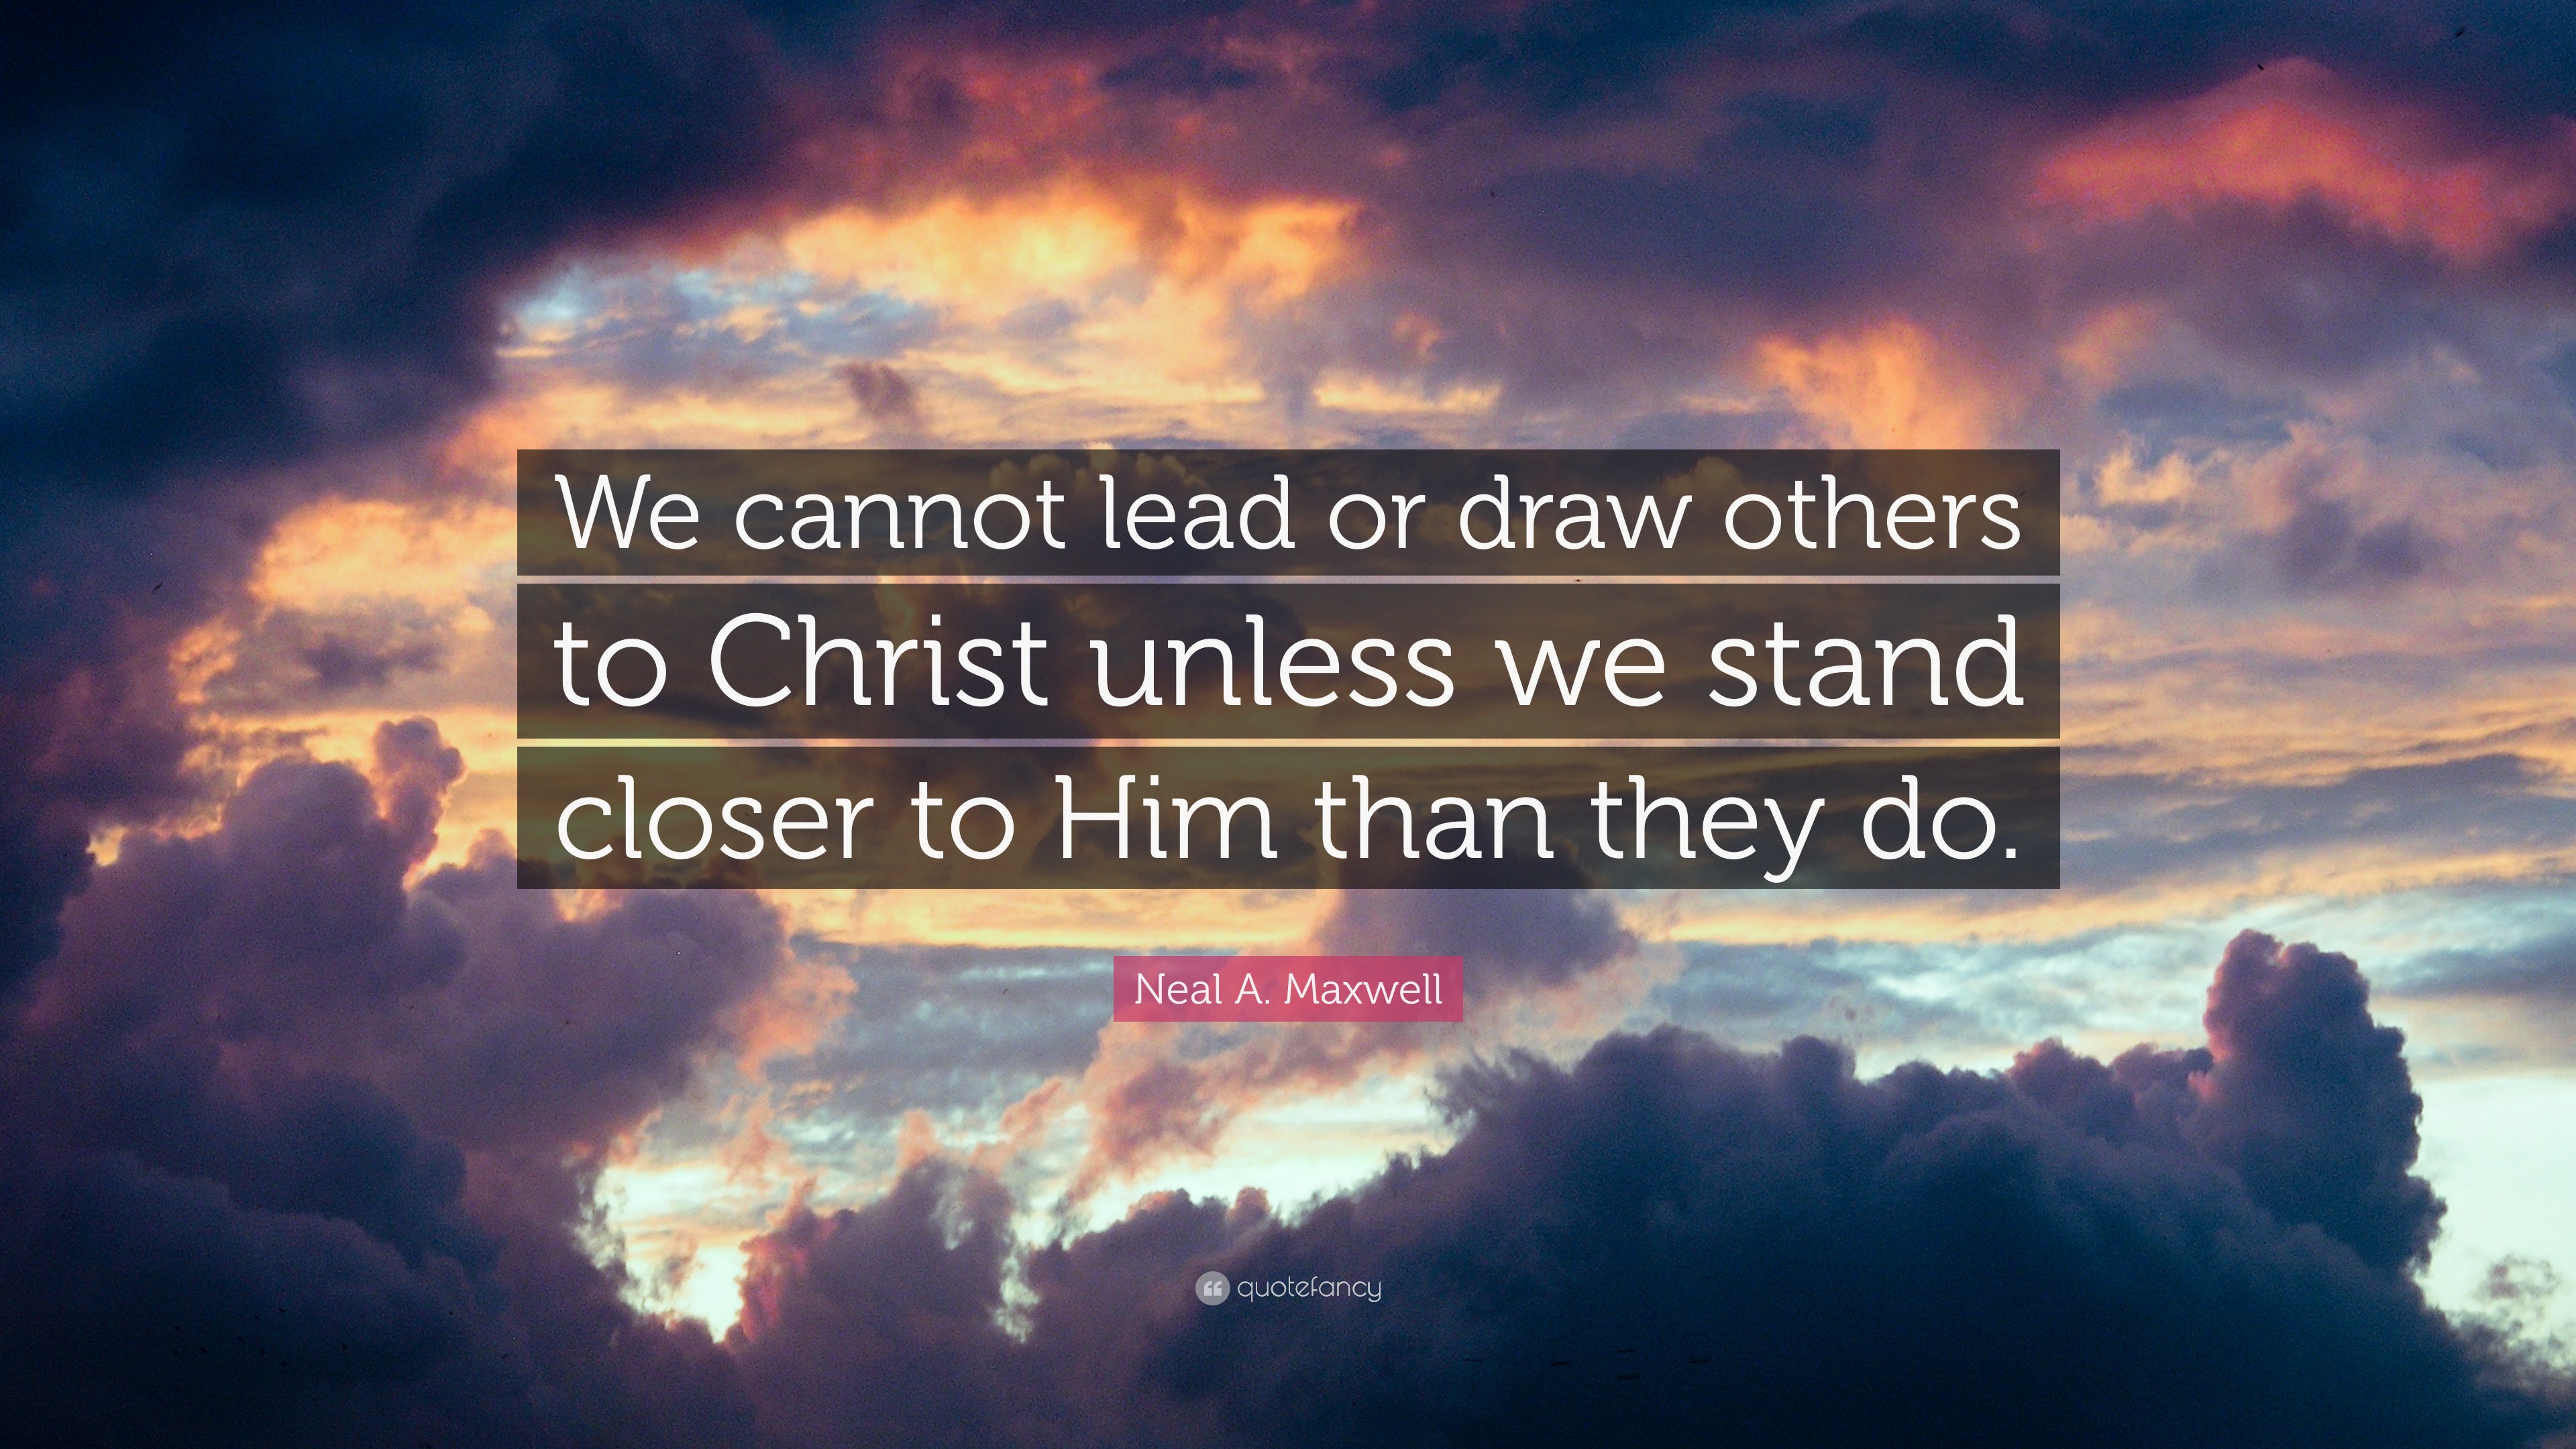 Neal A. Maxwell Quote: “We cannot lead or draw others to Christ unless